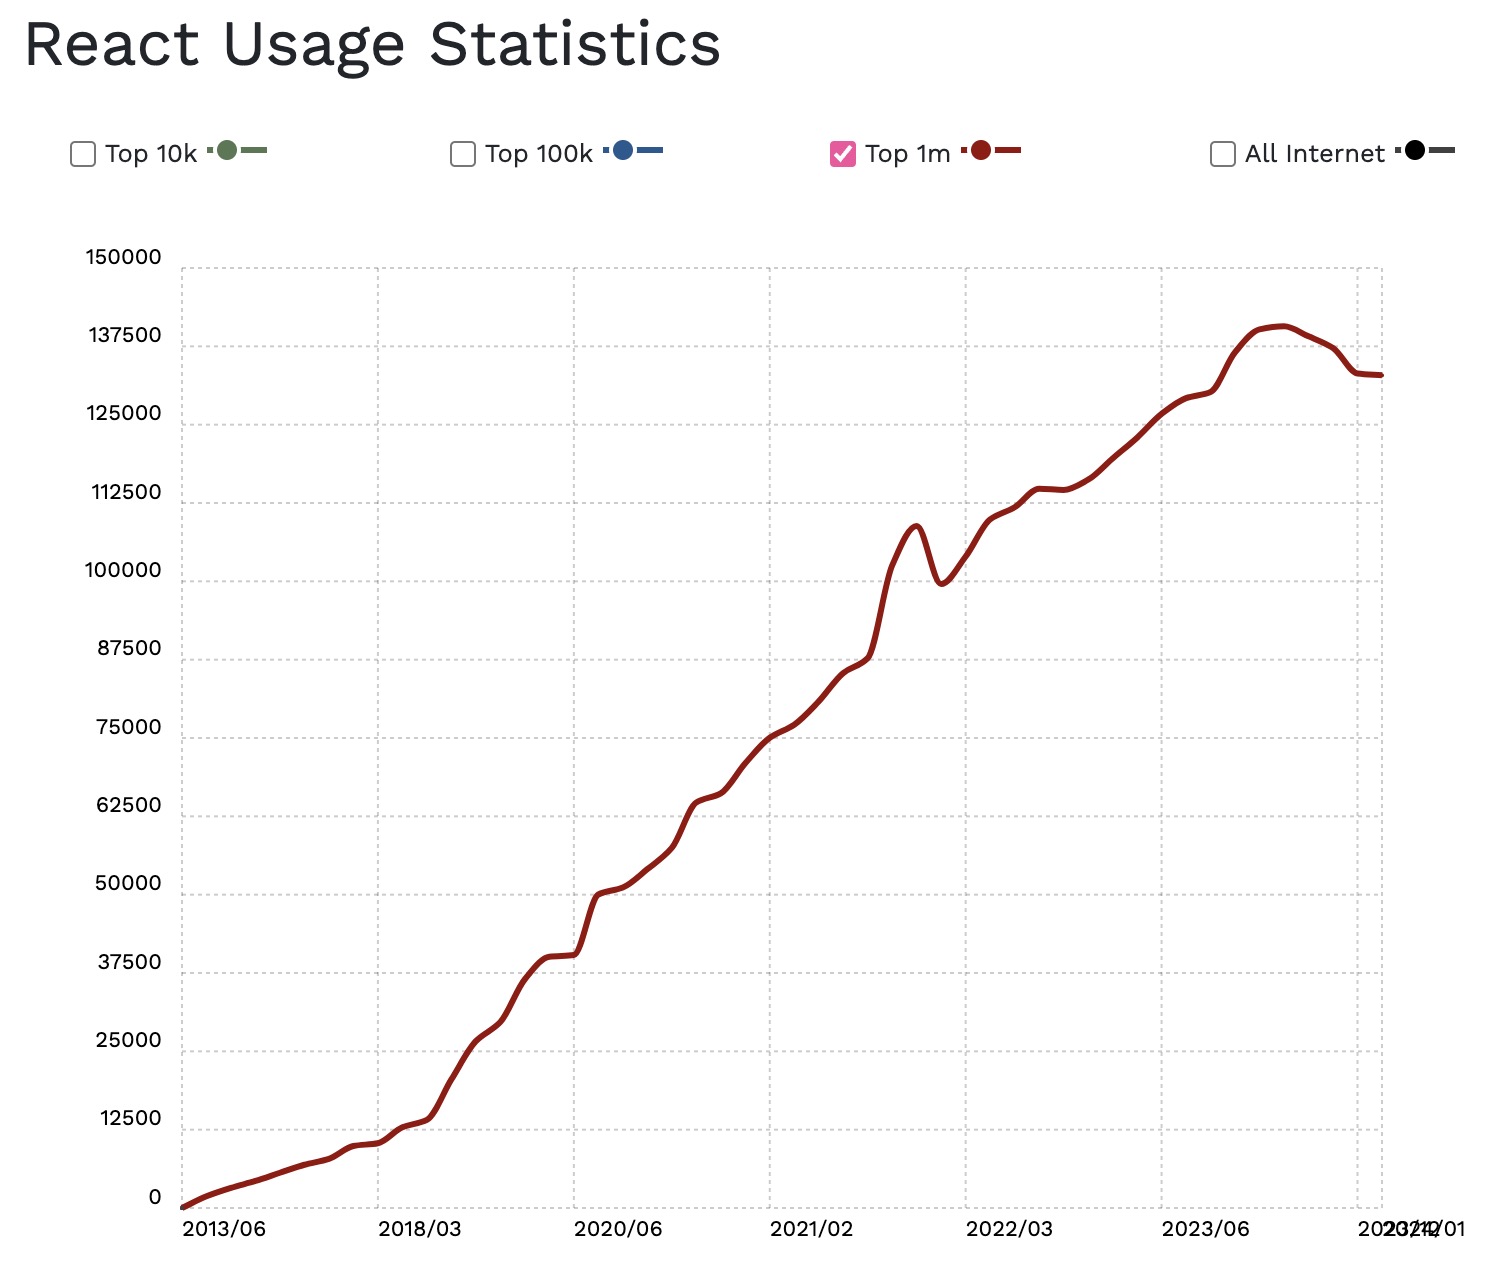 A line graph showing React usage has consistently gone up in the top million websites since 2013